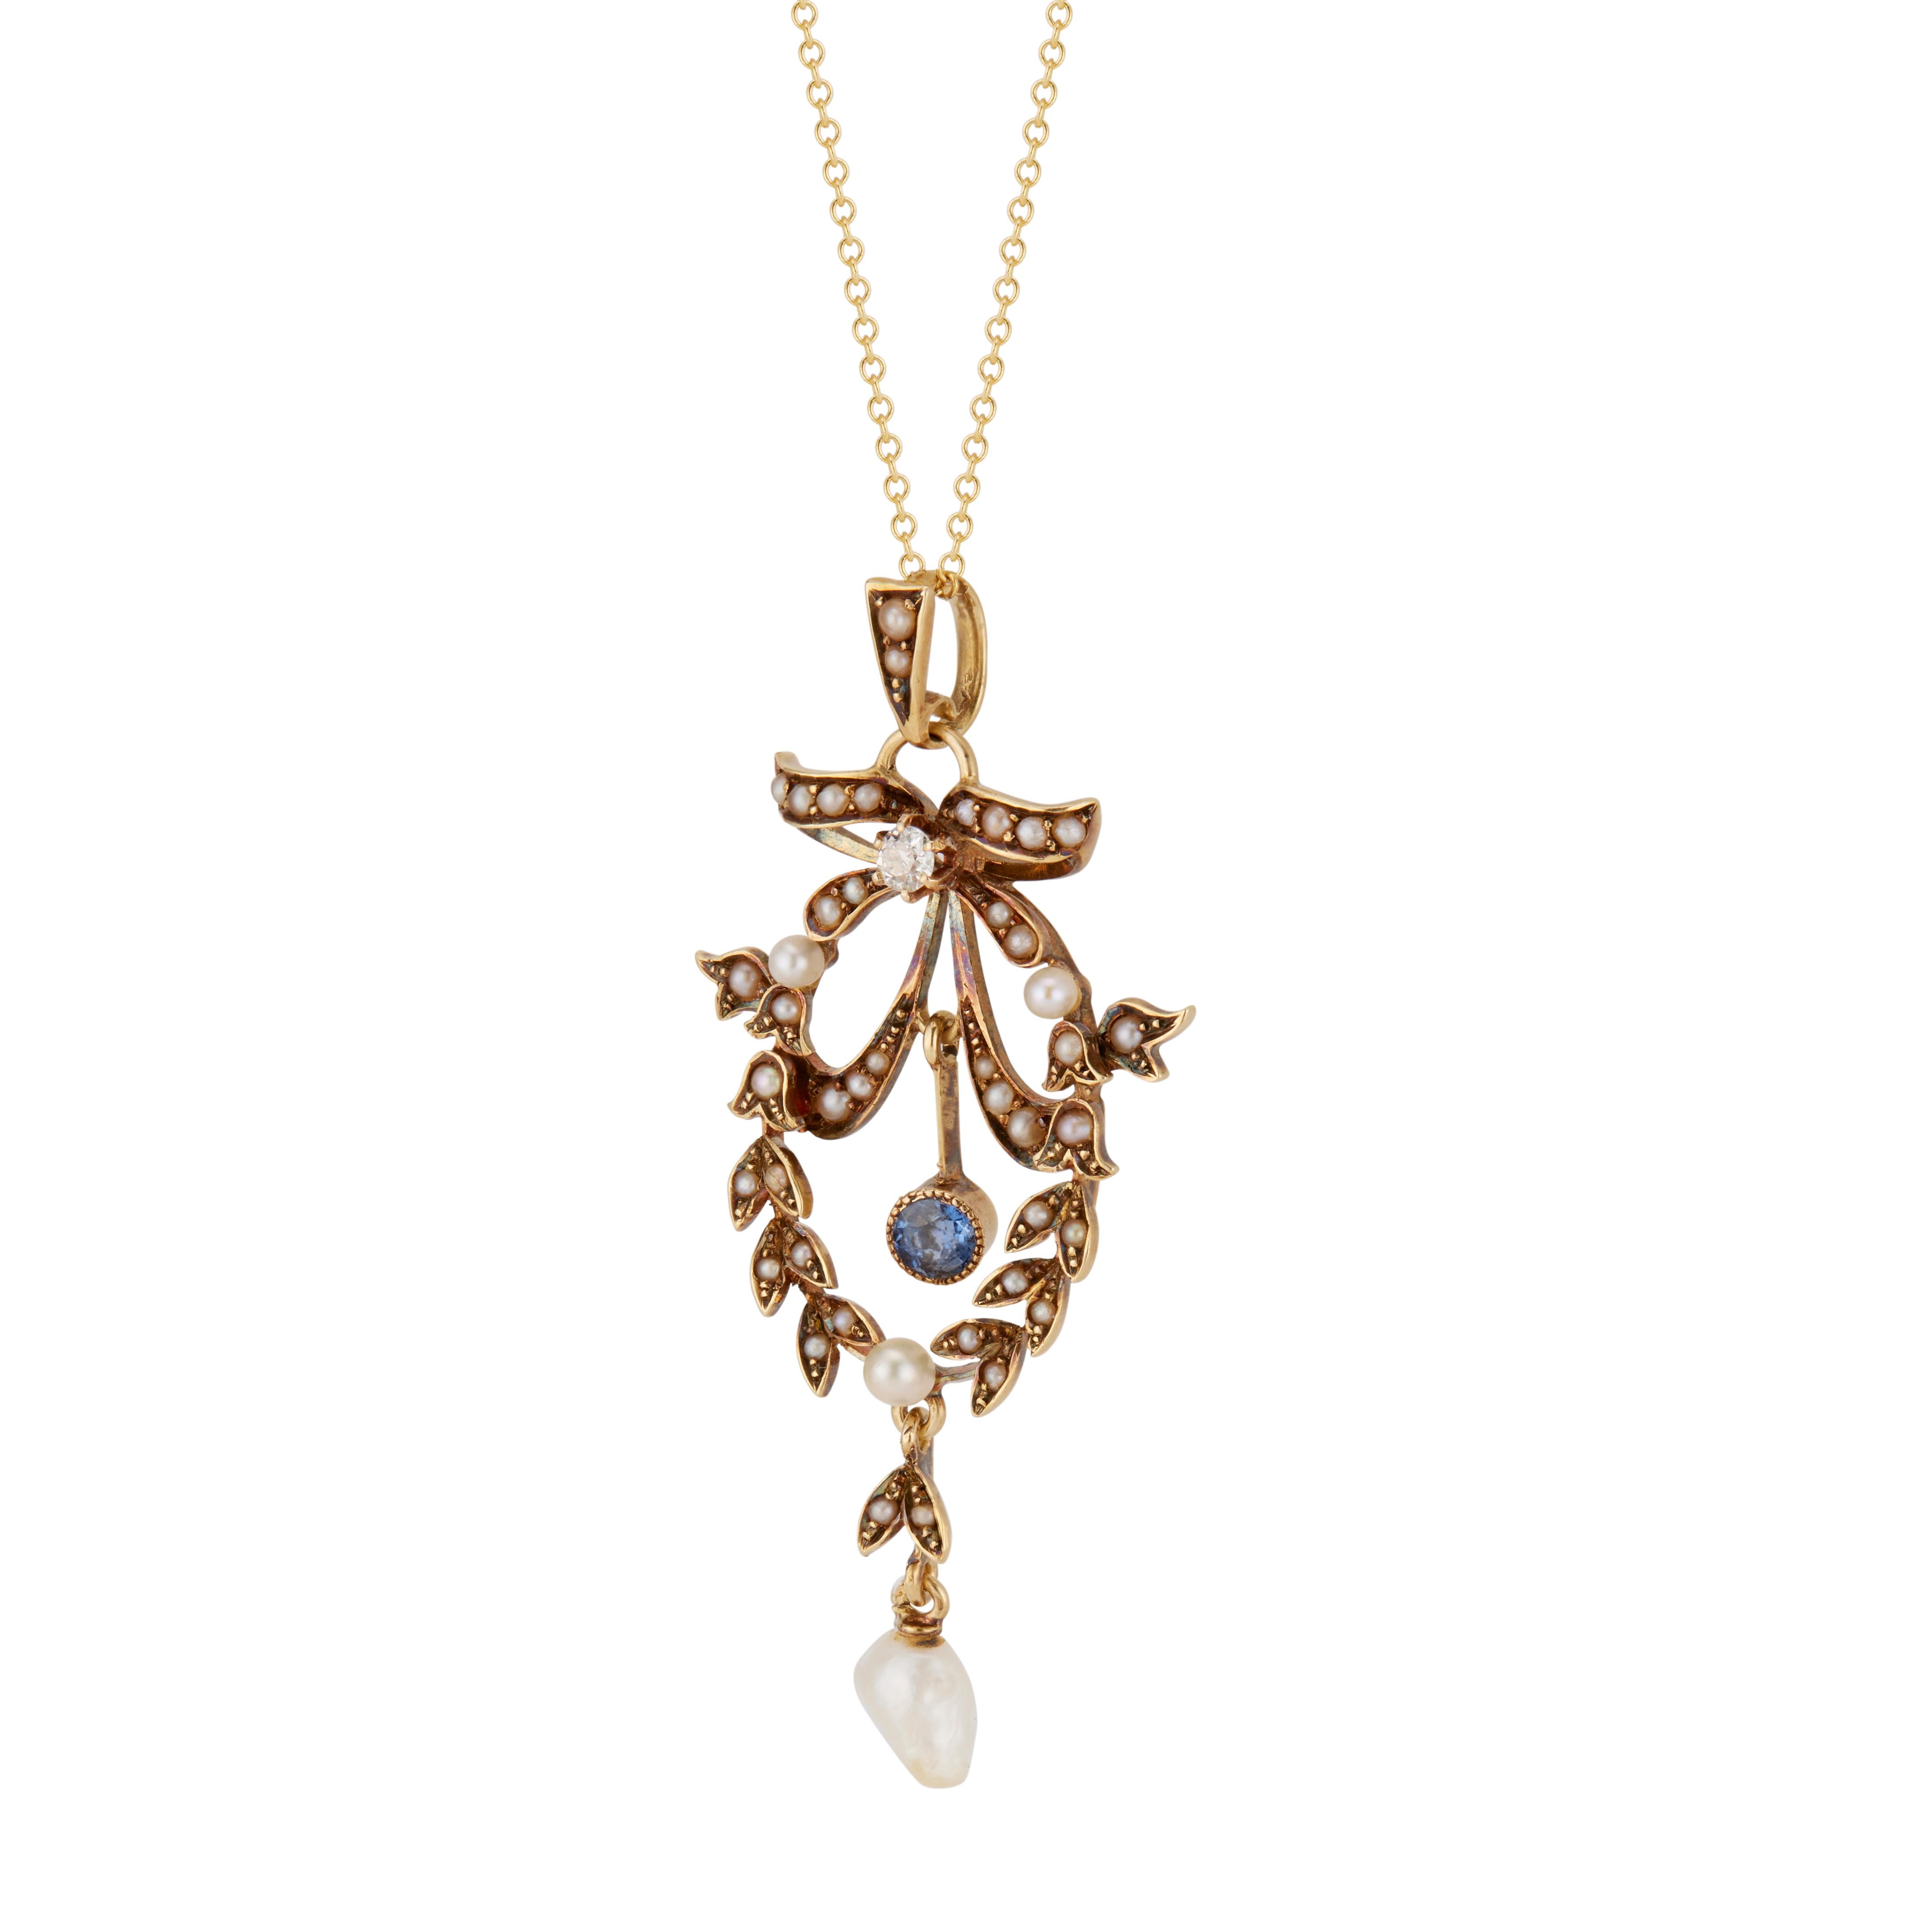 Original 1880's Victorian pendant with bow and wreath design pendant set with 43 natural untreated pearls along with one old cut diamond and one natural sapphire. Natural patina. 18 inch later chain. 

43 natural gray seed pearls
1 natural white